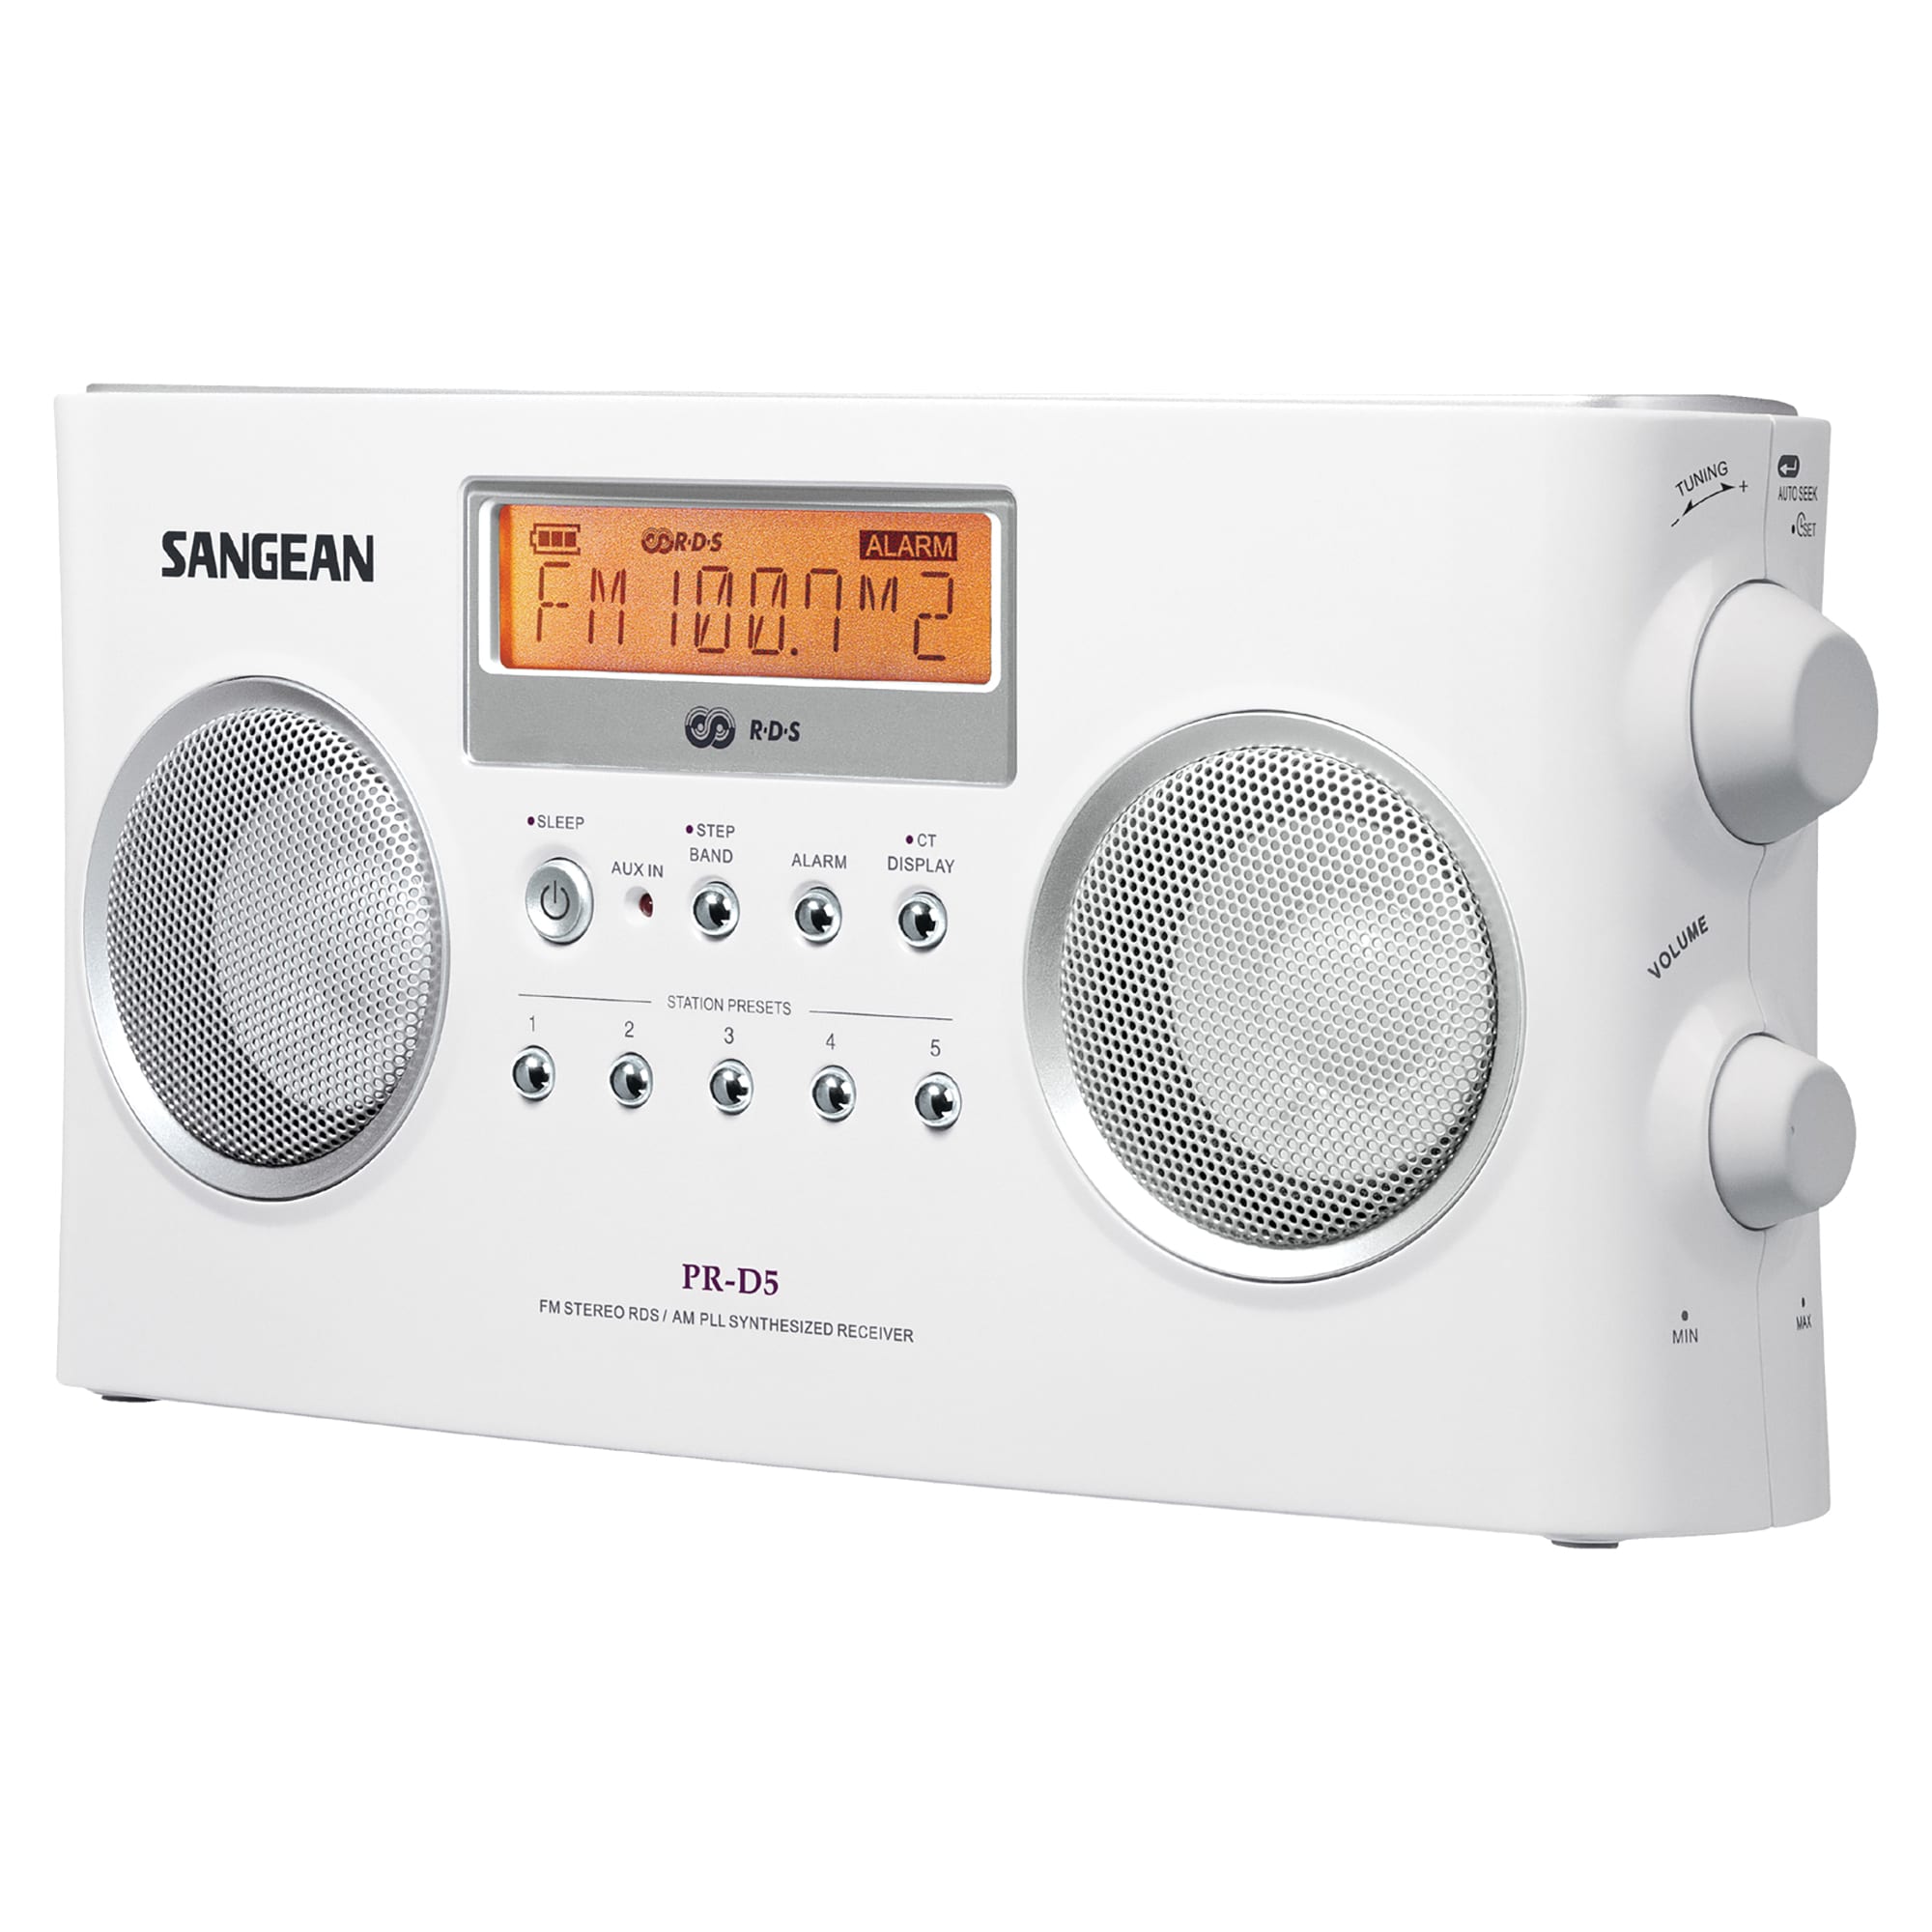 Sangean AM/FM HD Component Tuner  27% Off 5 Star Rating w/ Free S&H